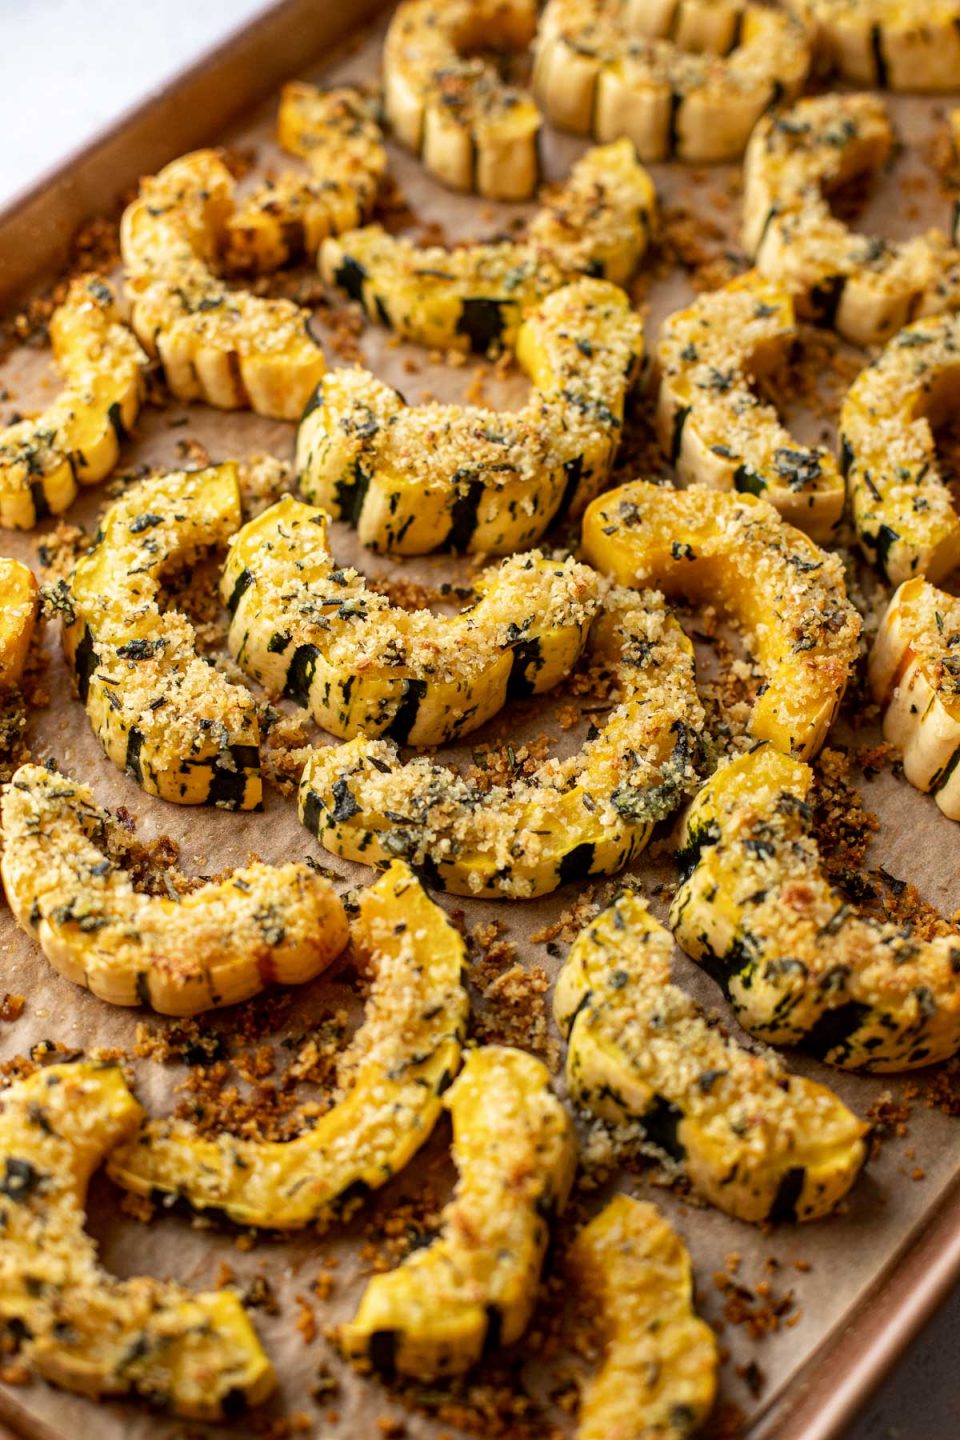 Parmesan Crusted Roasted Delicata Squash arranged on a baking sheet lined with brown parchment paper.